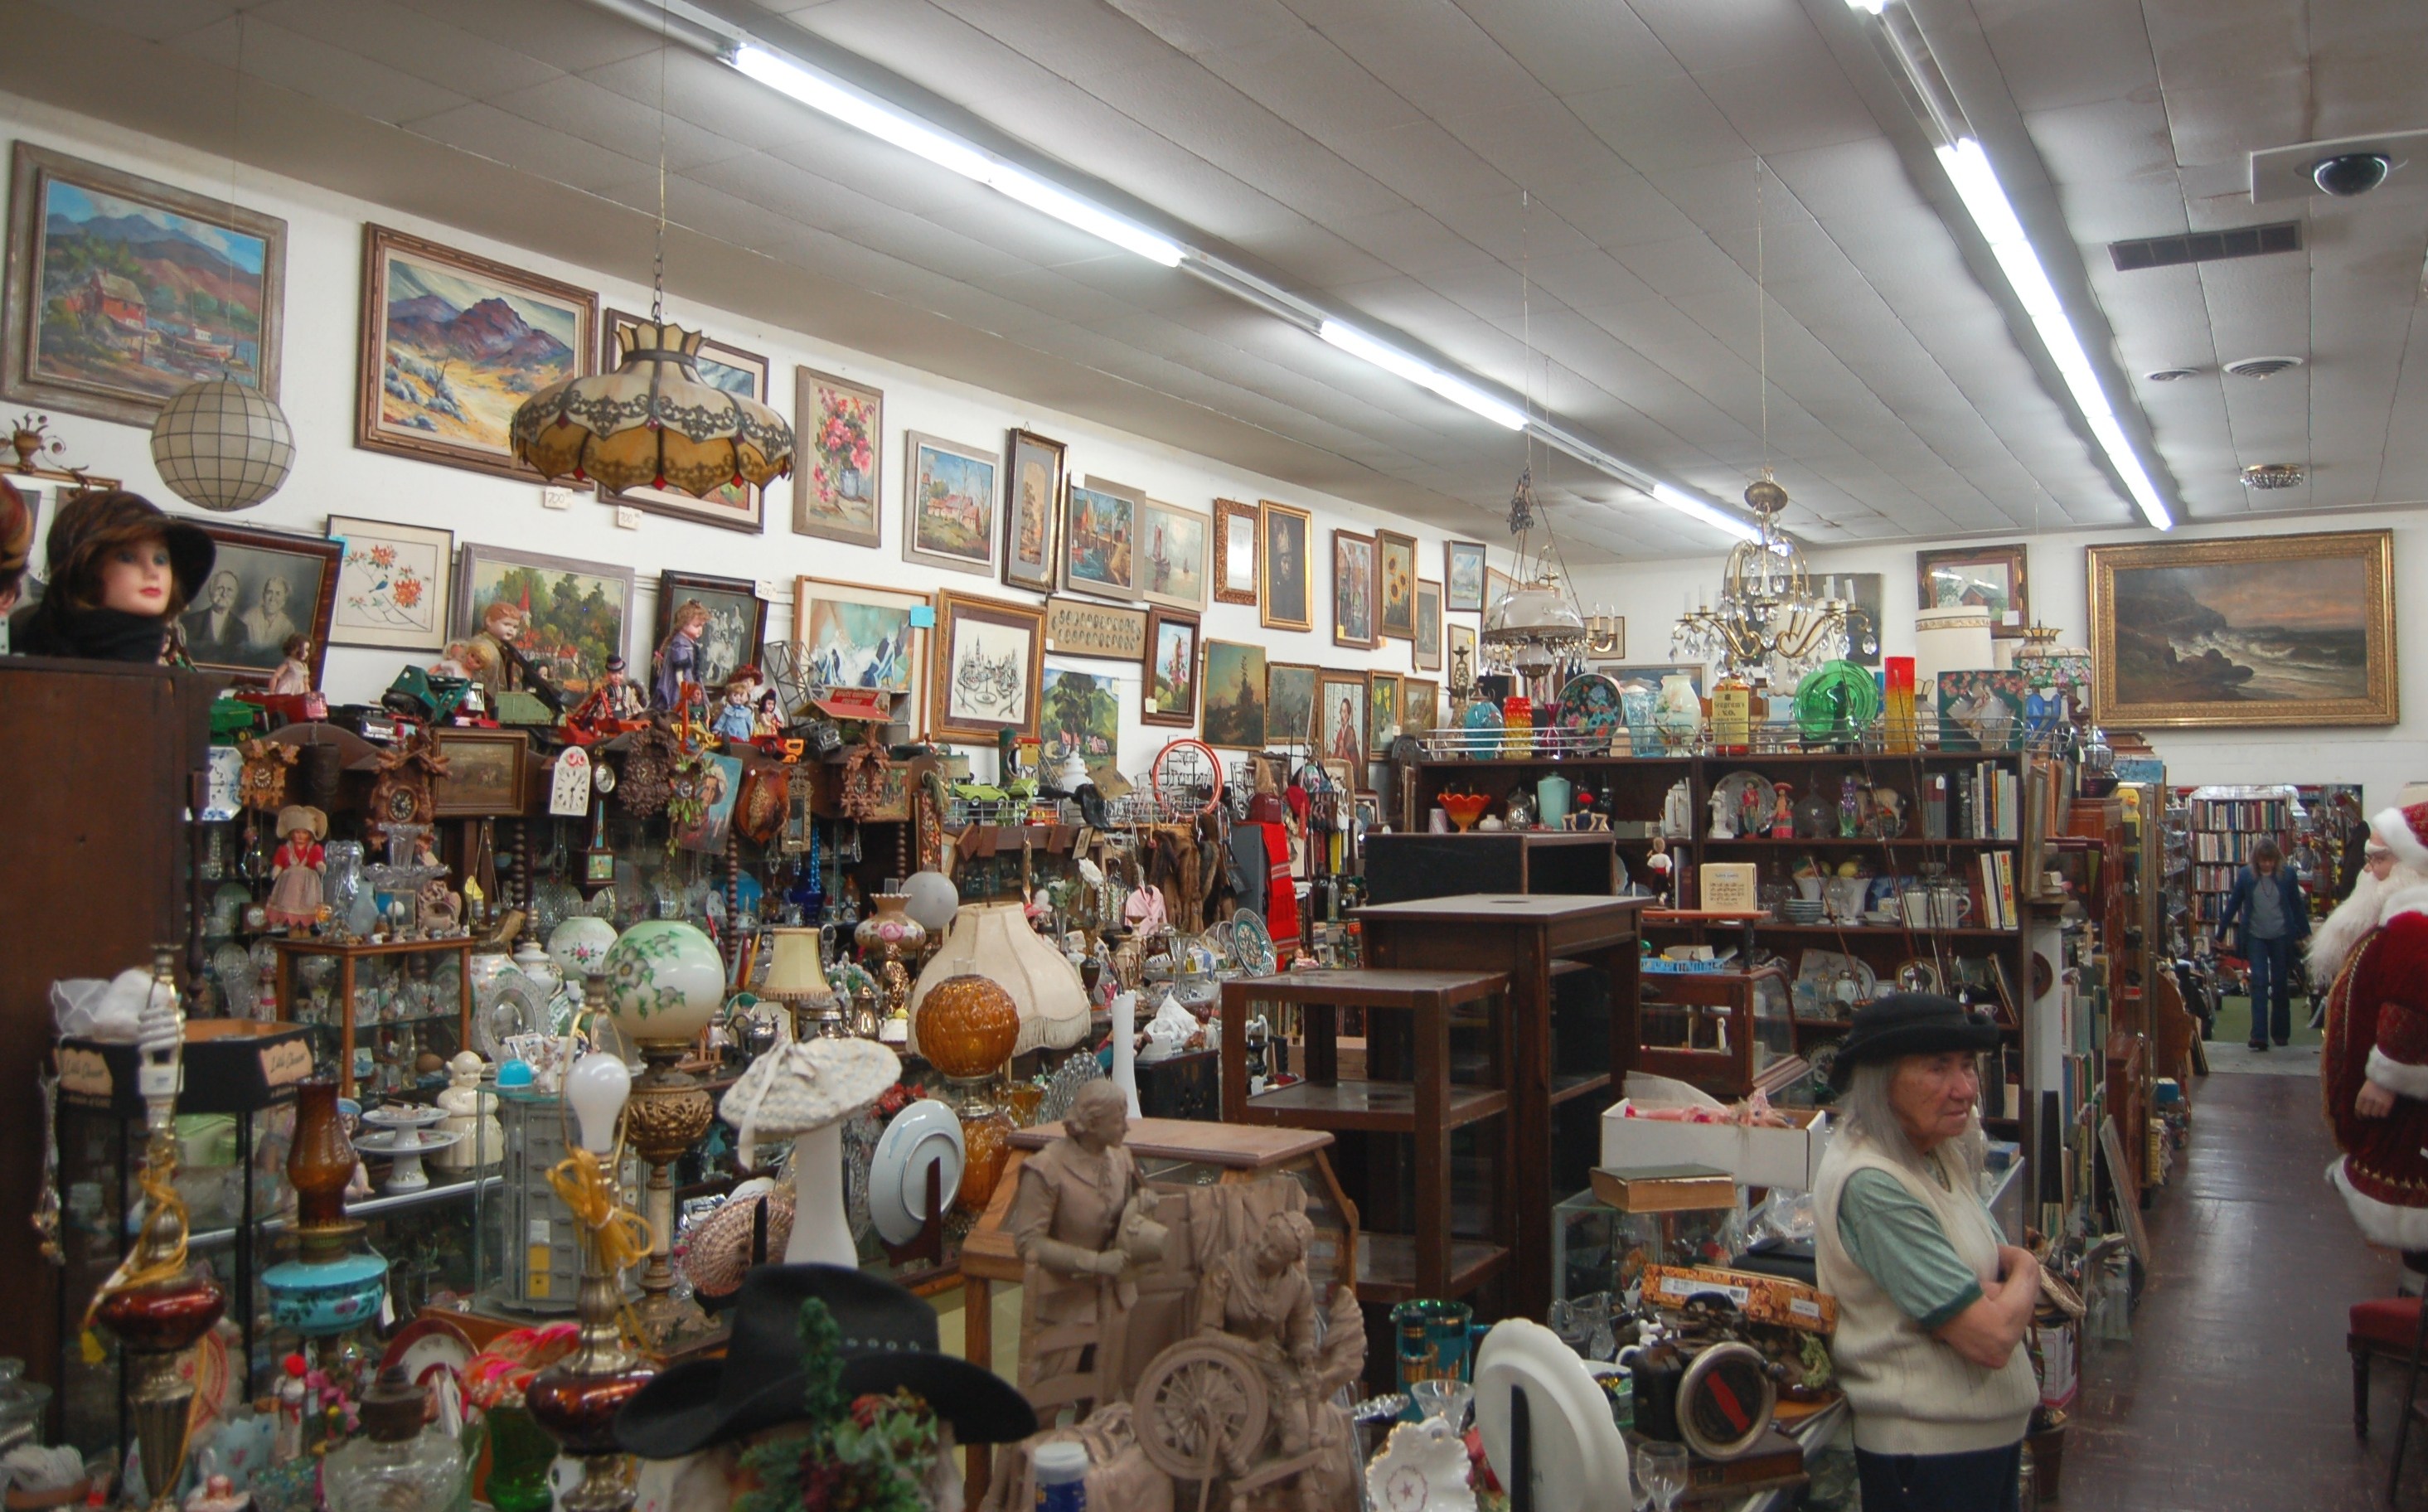 Pauline's Antiques - photo by Darin Moriki for Bay Area News Group